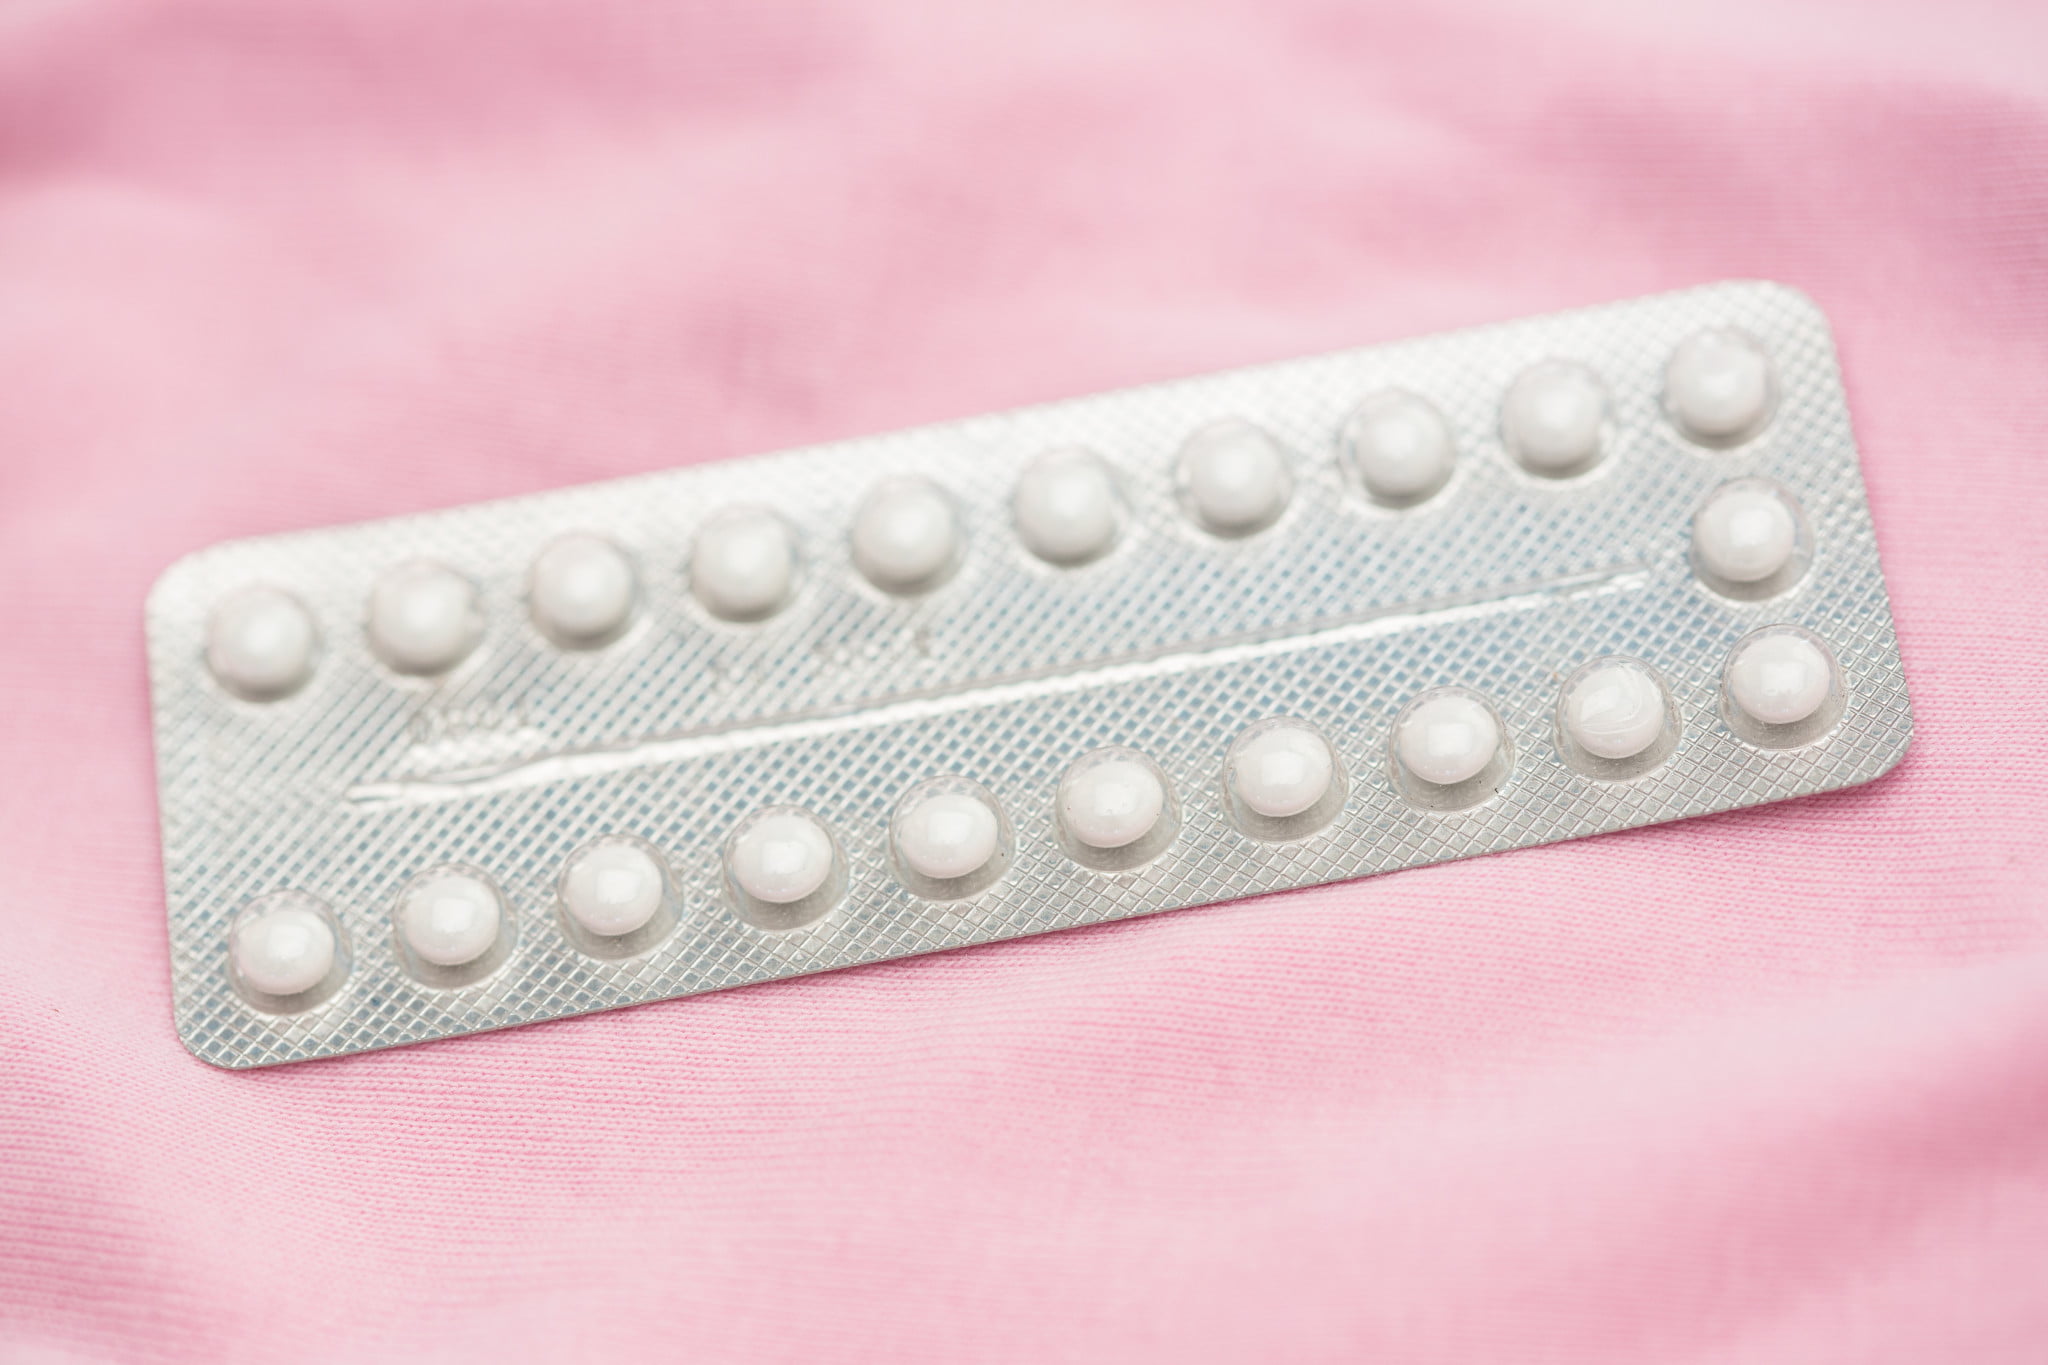 packet of contraceptive pills on pink background